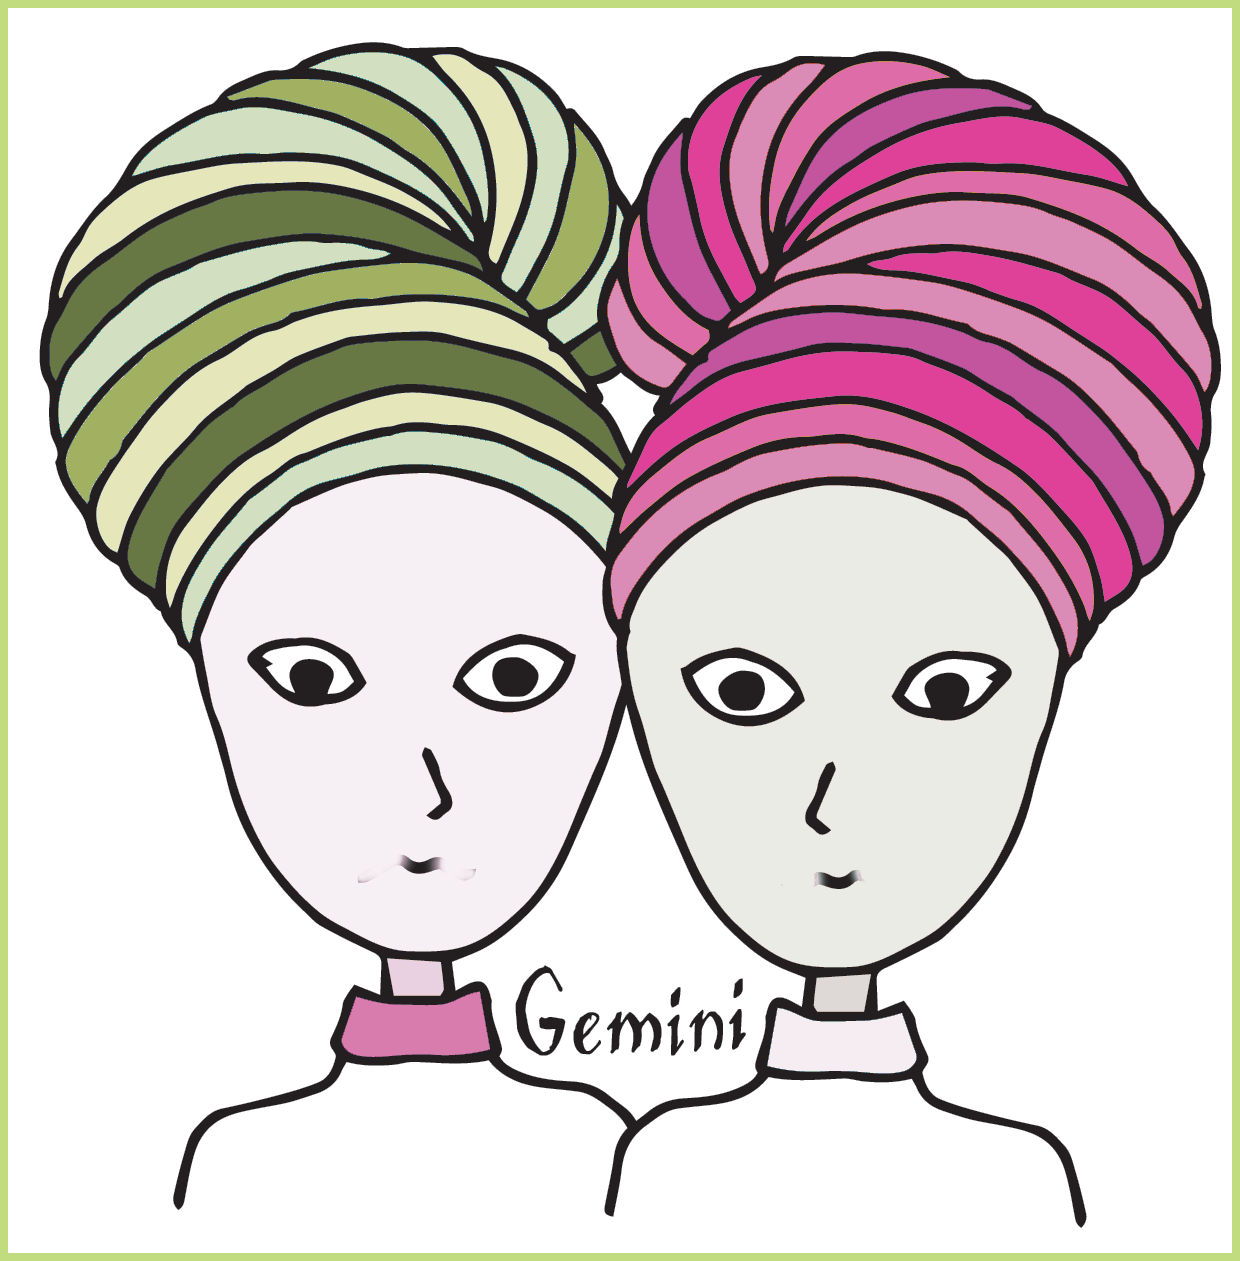 Two women representing twins, identical but in different colors (pink and green)